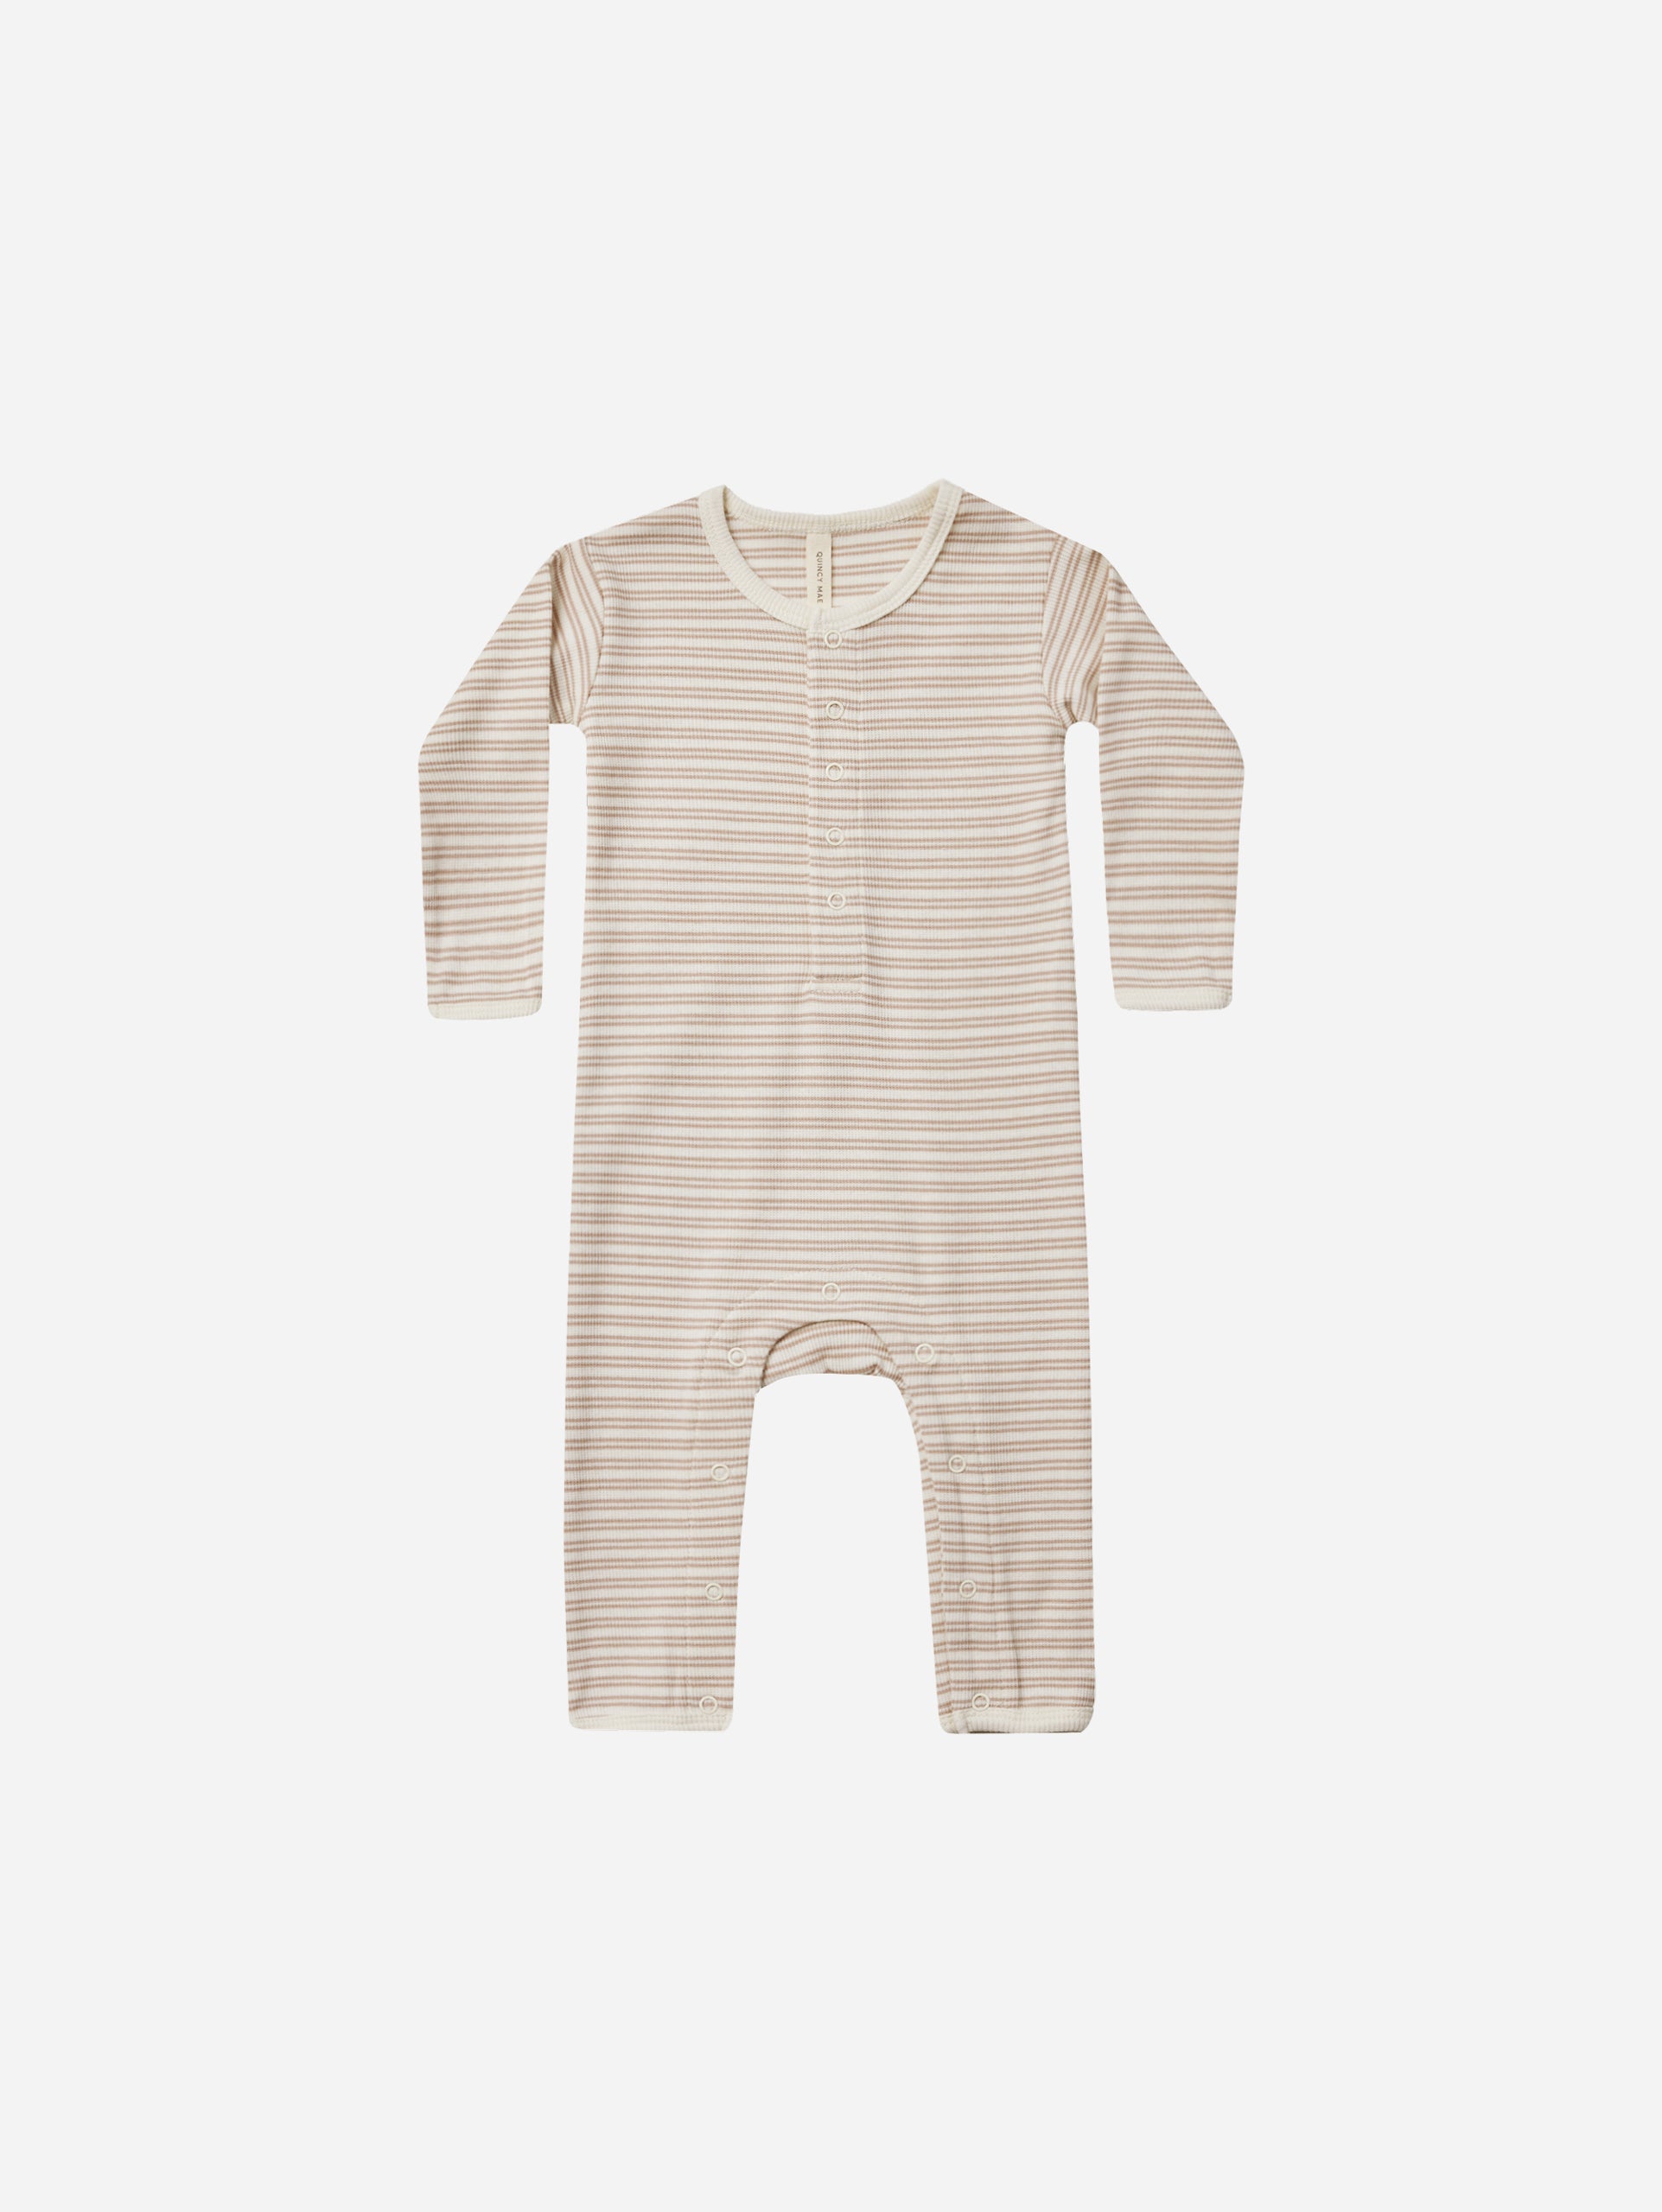 Baby Jumpsuit || Oat Stripe - Rylee + Cru | Kids Clothes | Trendy Baby Clothes | Modern Infant Outfits |